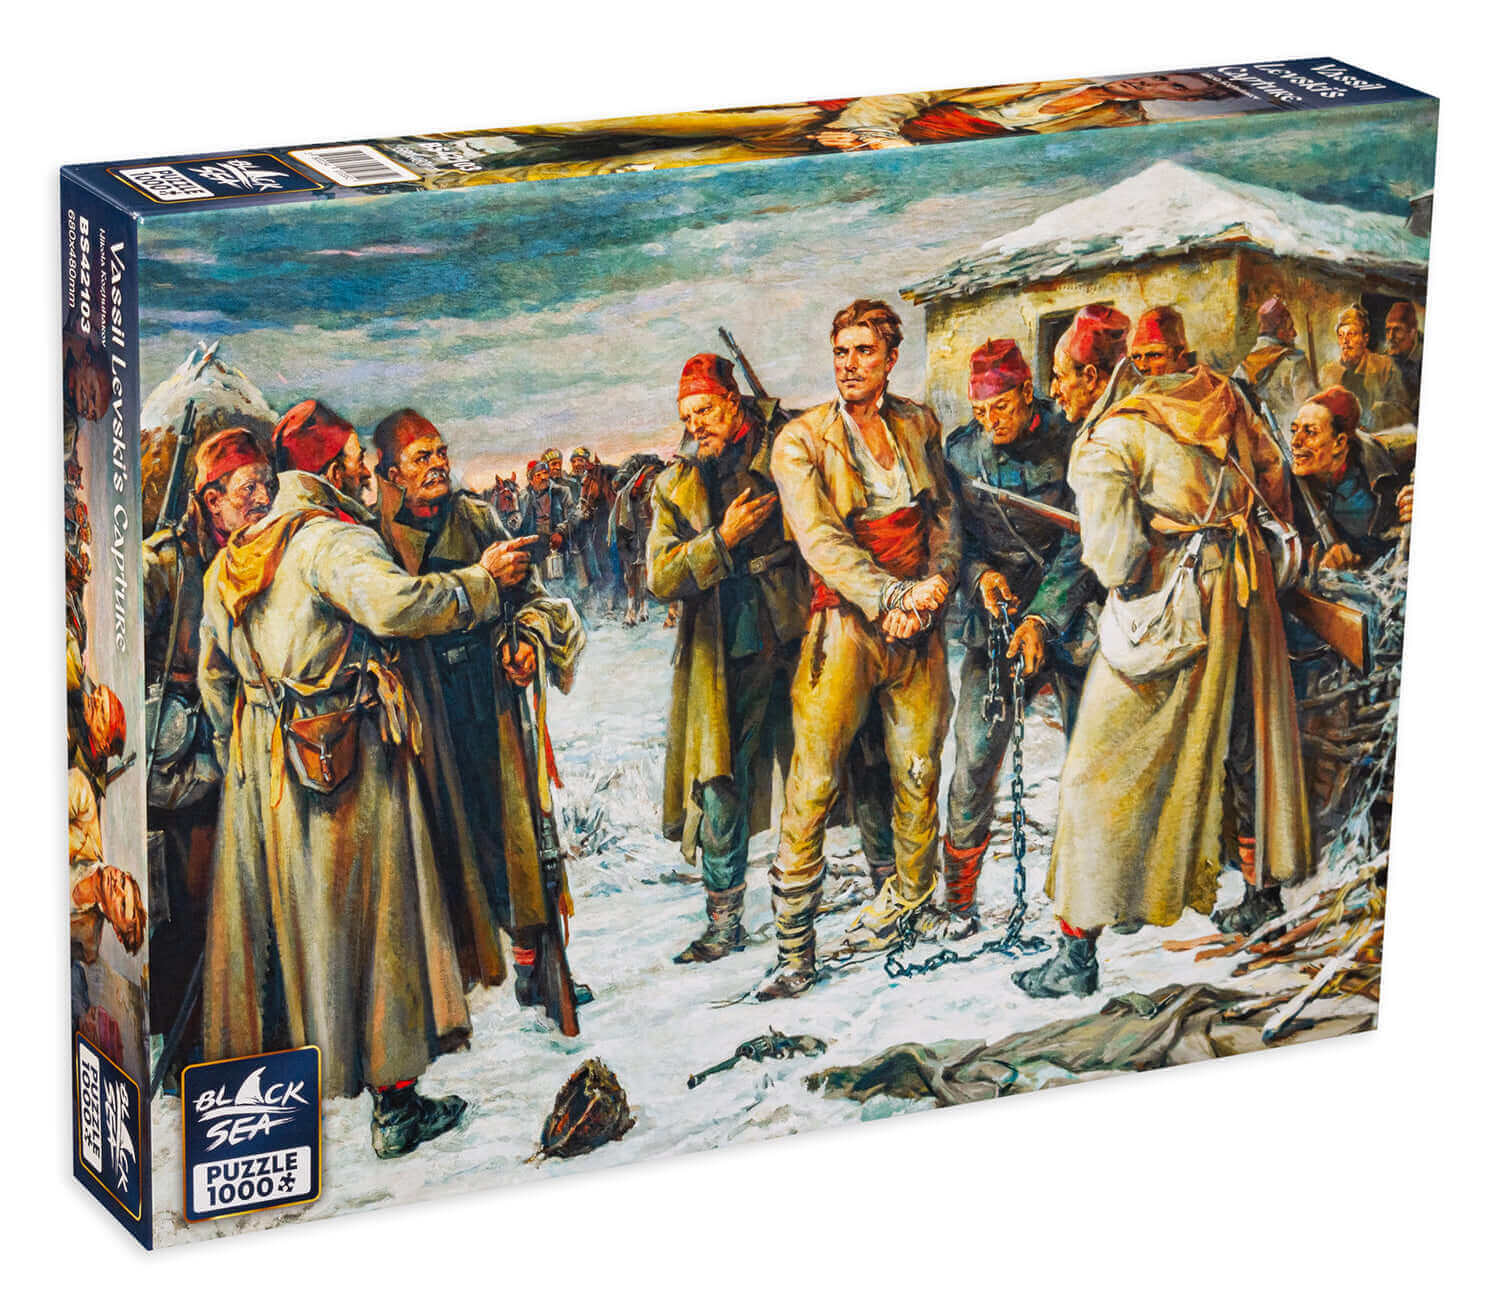 Puzzle Black Sea 1000 pieces - Levski, Vassil Levski is Bulgaria’s most revered national hero who gave his life for his country. The Apostle of Liberty, as he is known, played a crucial role in kindling the fight for Bulgarian independence and his ideas o